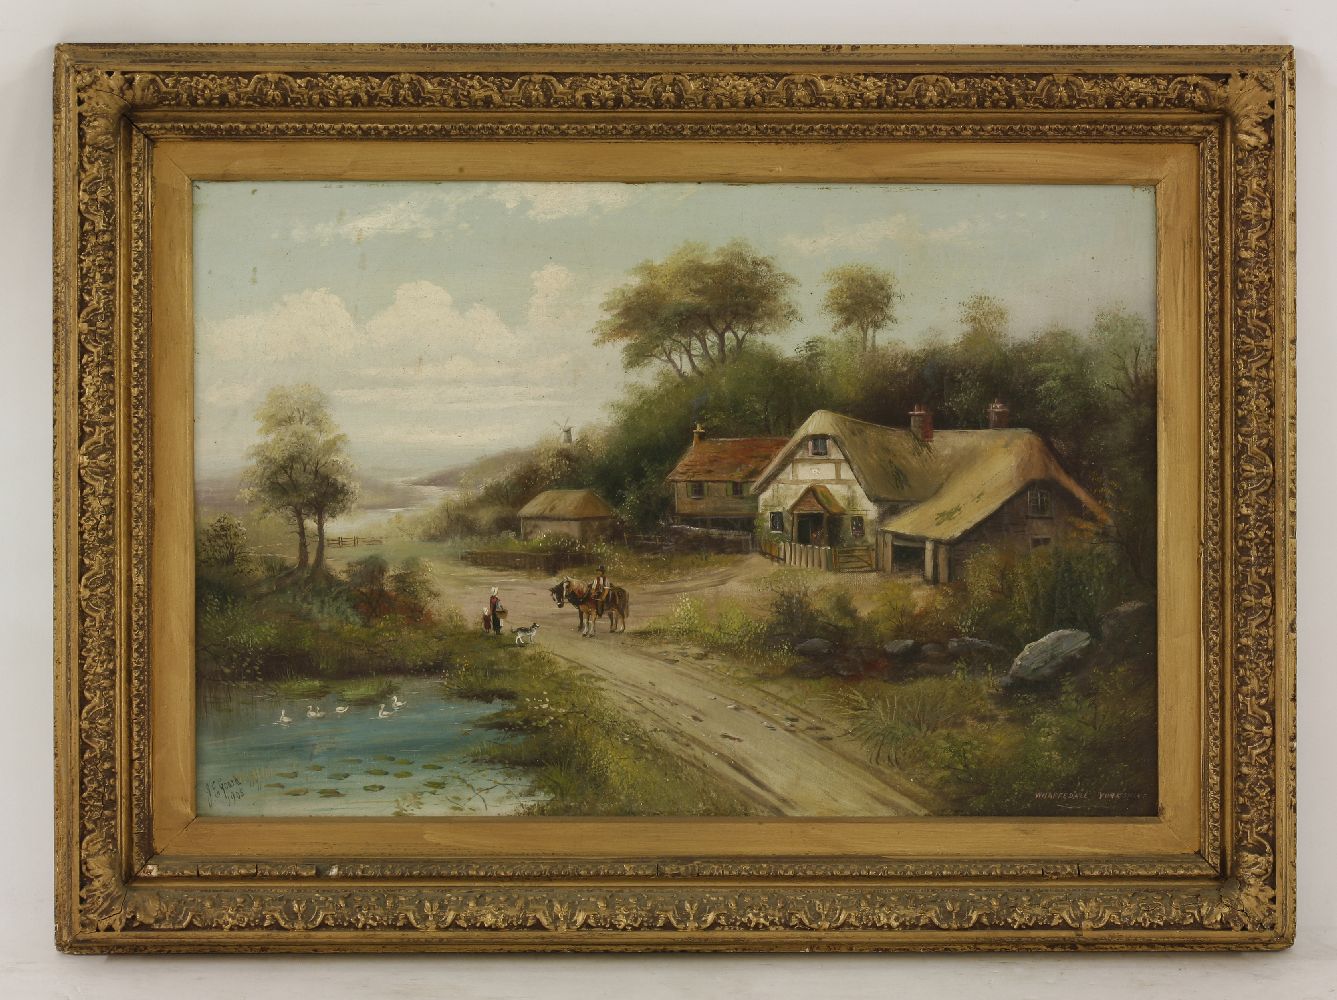 J... E... Goard, early 20th centuryA LANDSCAPE WITH FIGURES OUTSIDE A THATCHED COTTAGE,